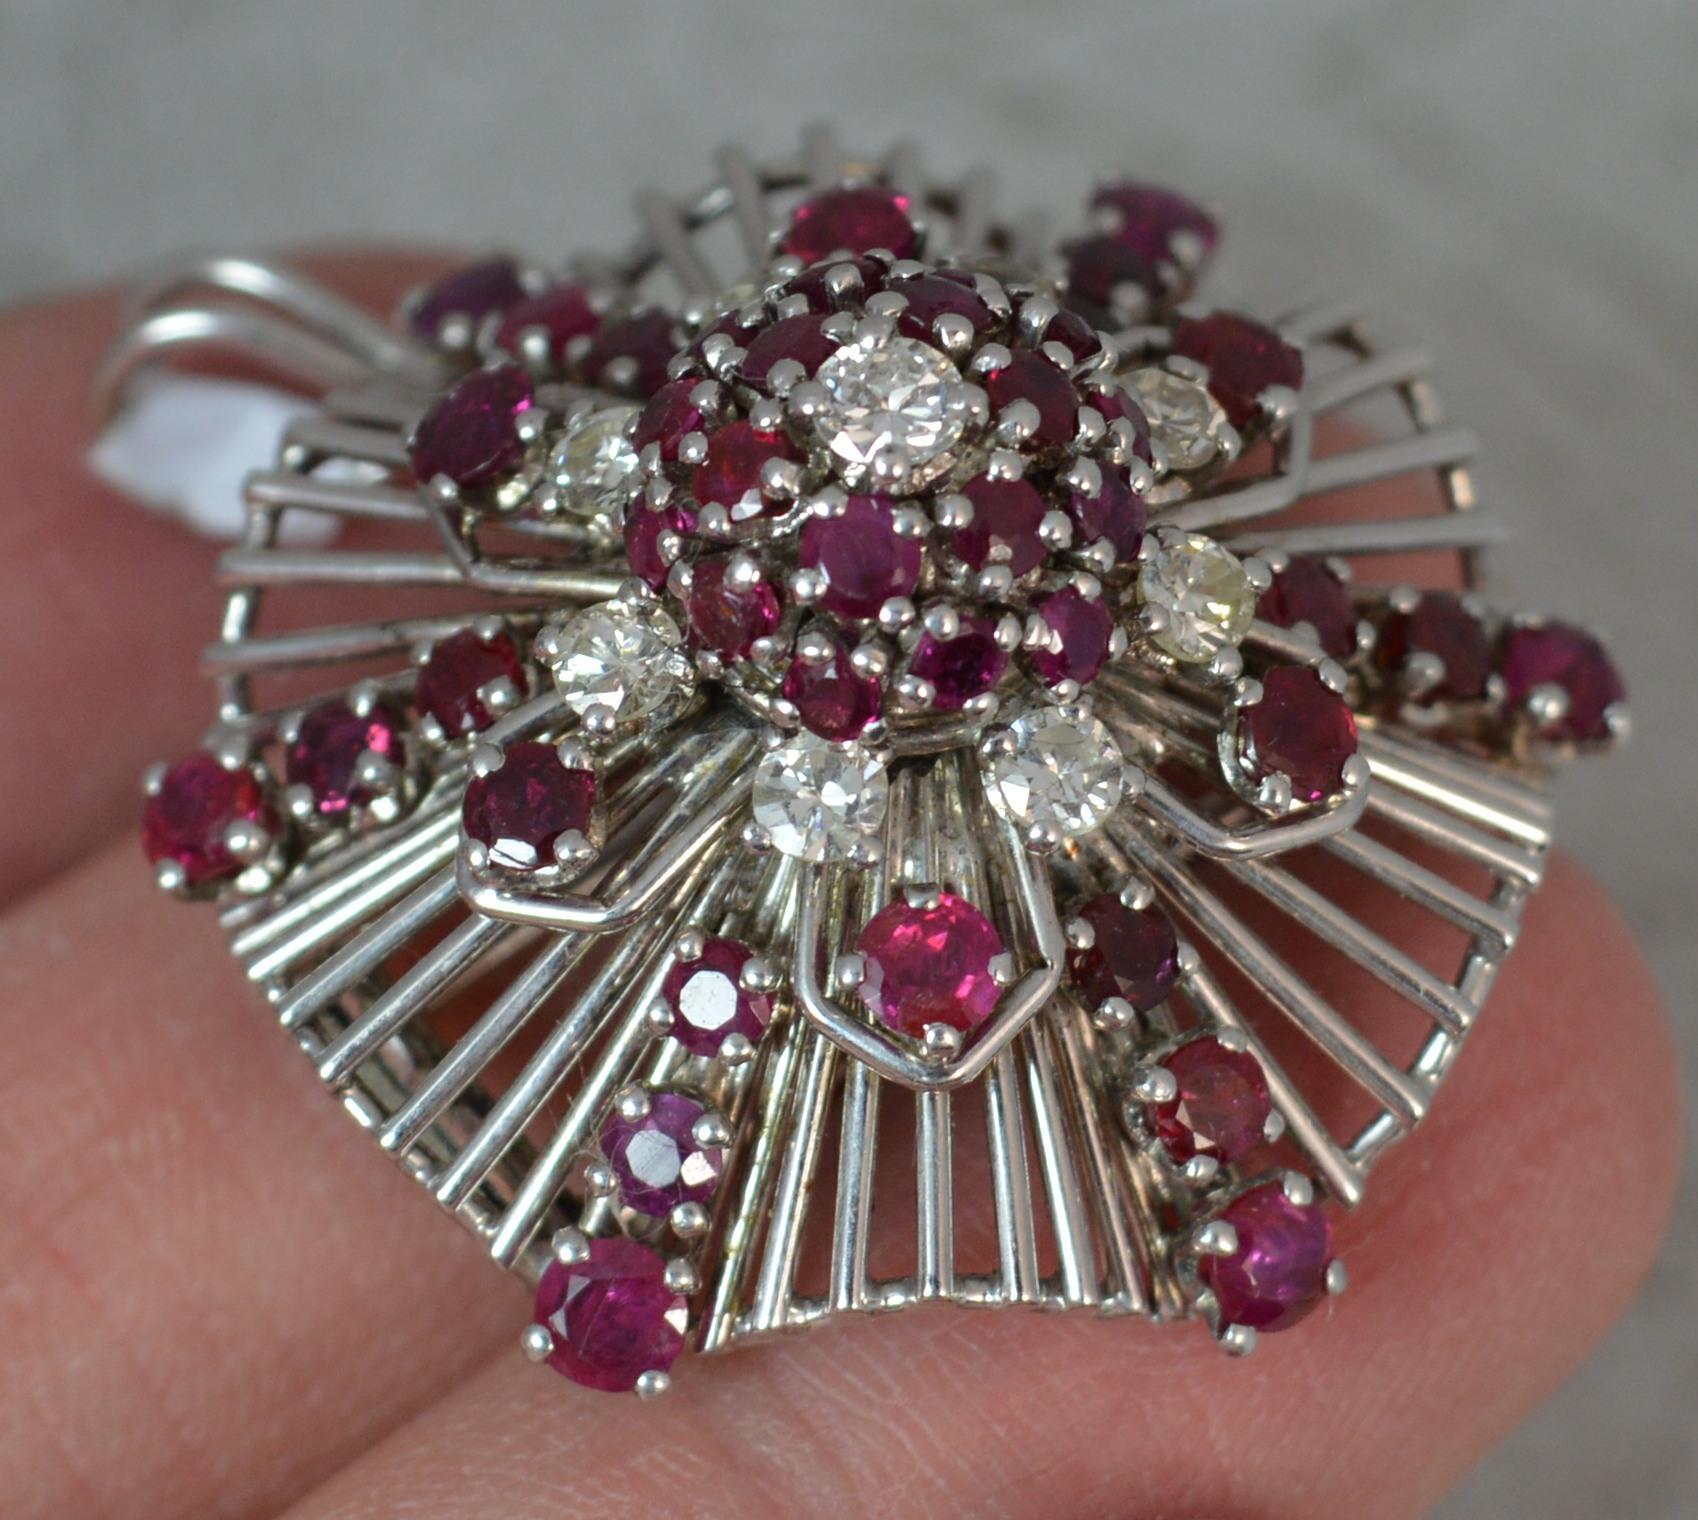 A fantastic Platinum, Ruby and Diamond cluster pendant and brooch.
Designed with nine vs1 grade round brilliant cut diamonds with multiple round cut rich red rubies.
Amazing retro design with many plain platinum bars running throughout.

Condition;